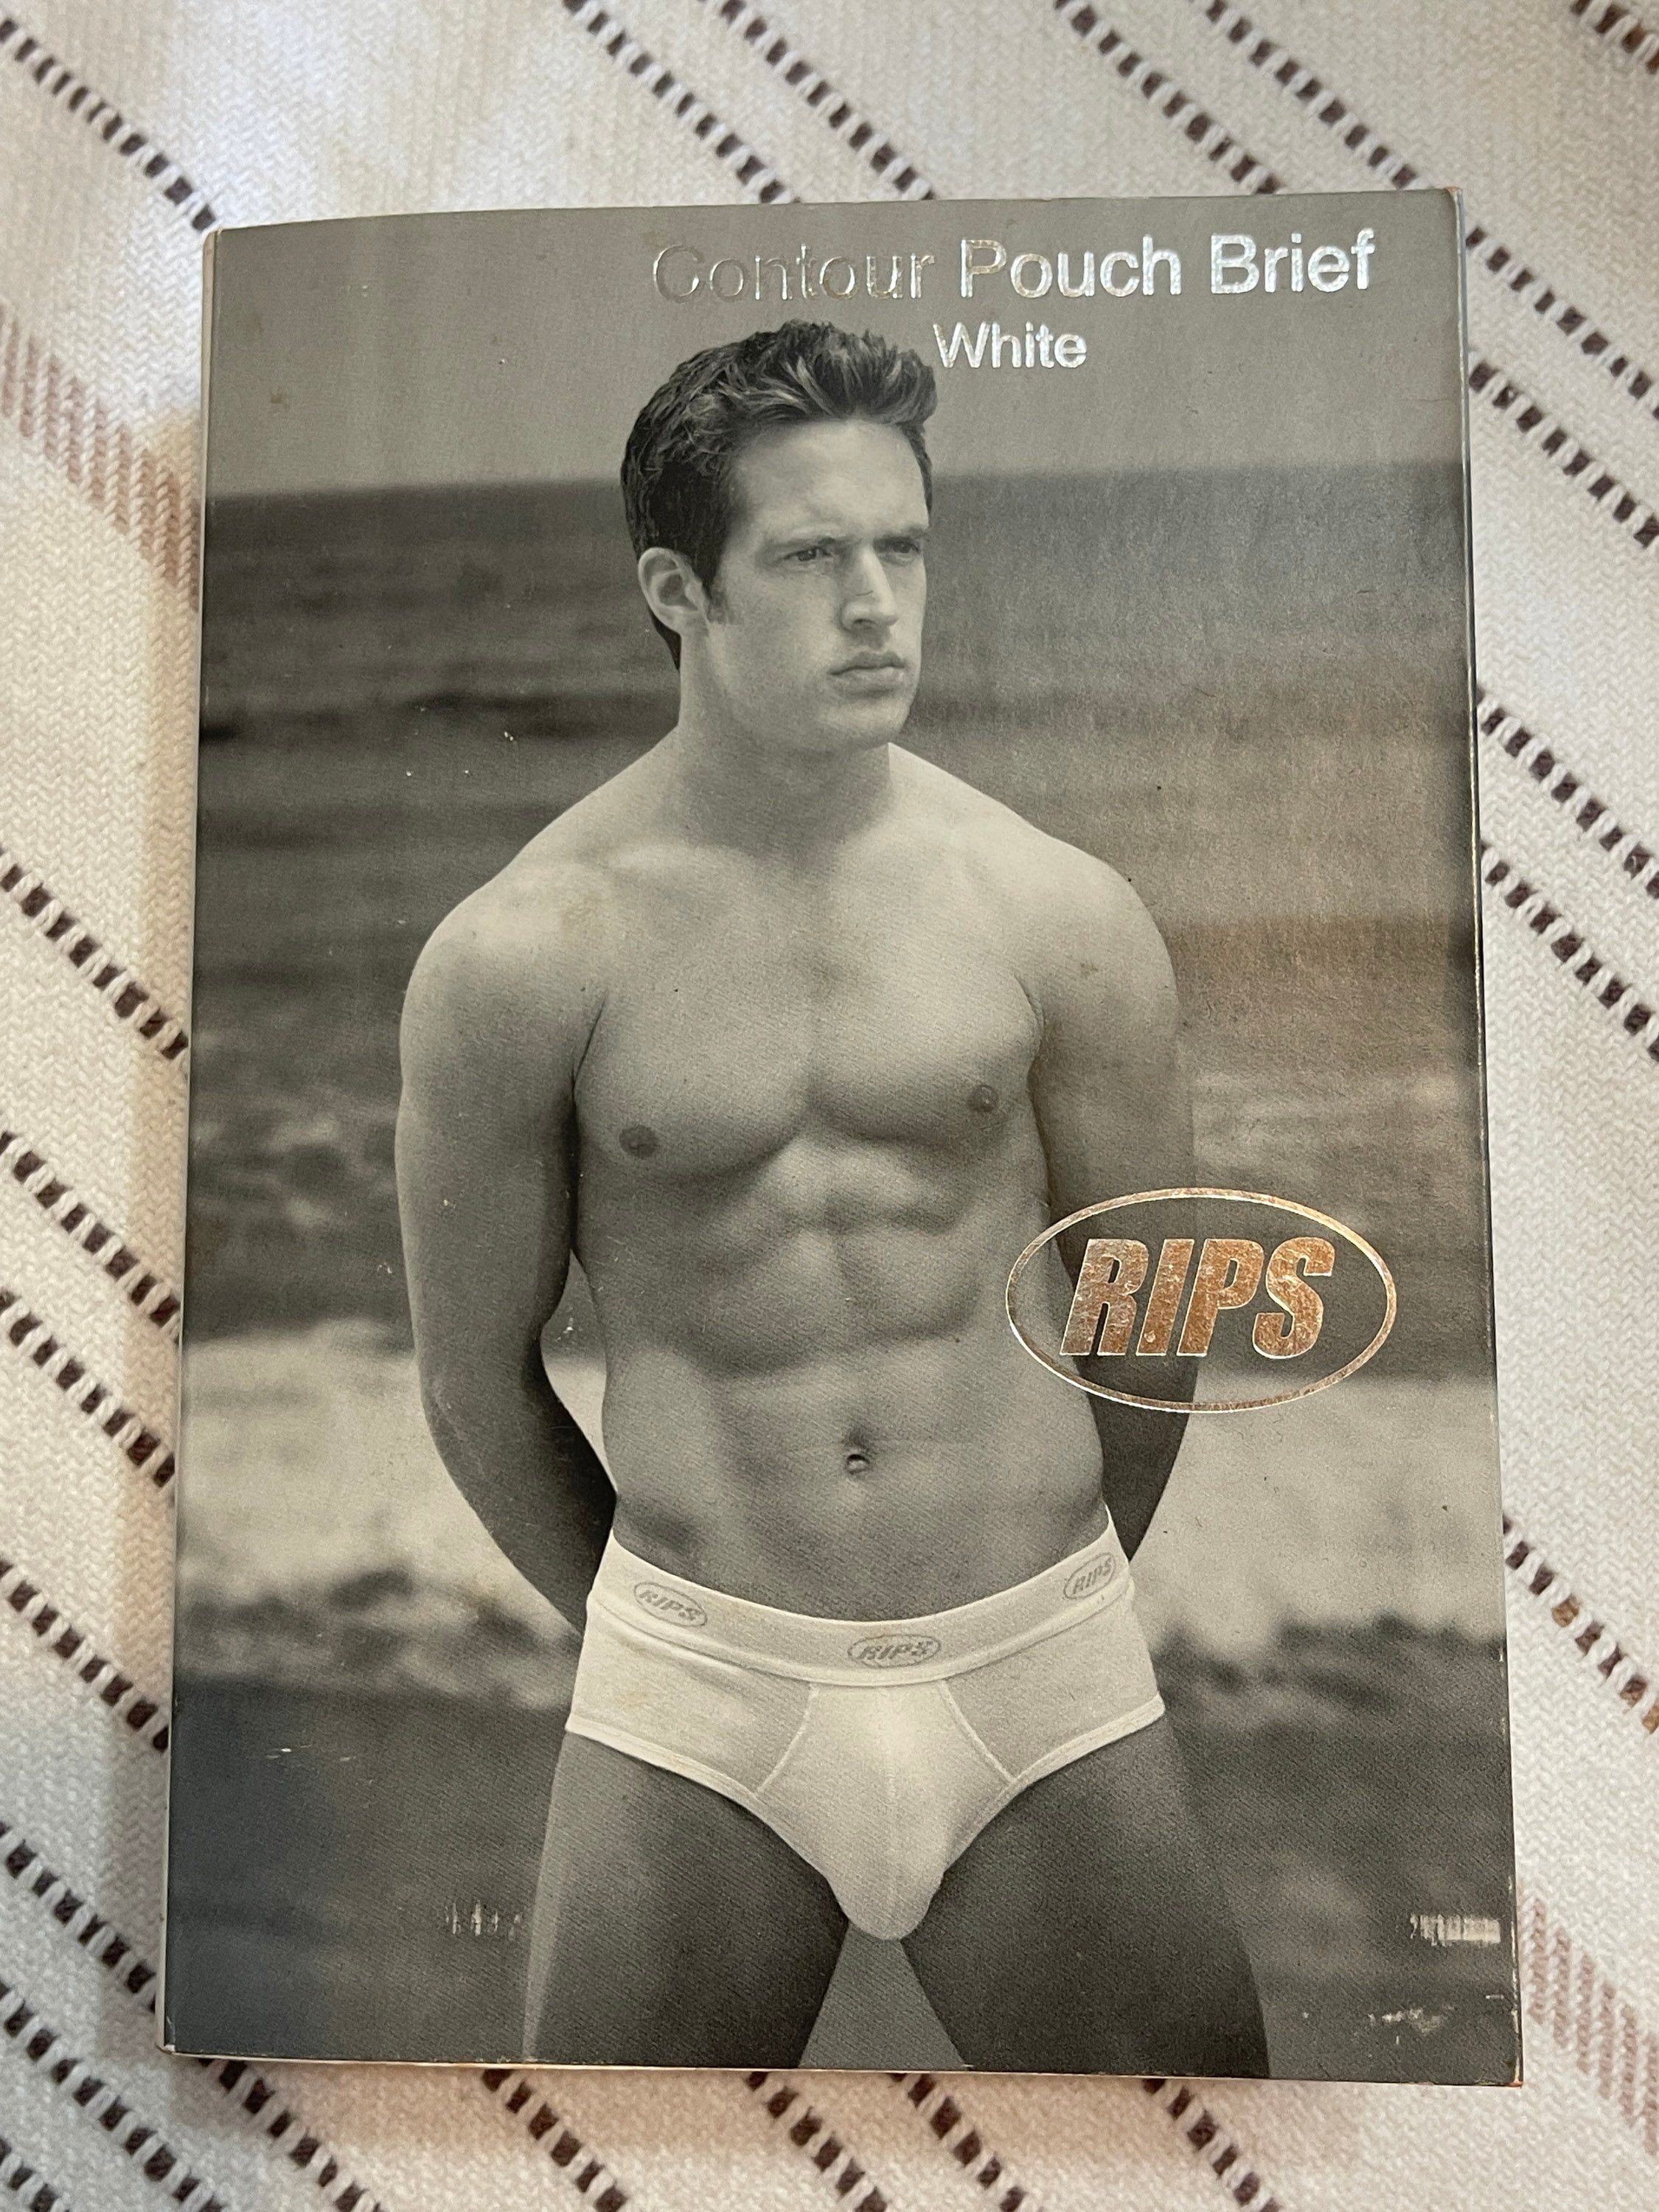 Vintage RIPS Contour Pouch Brief White small -  Canada